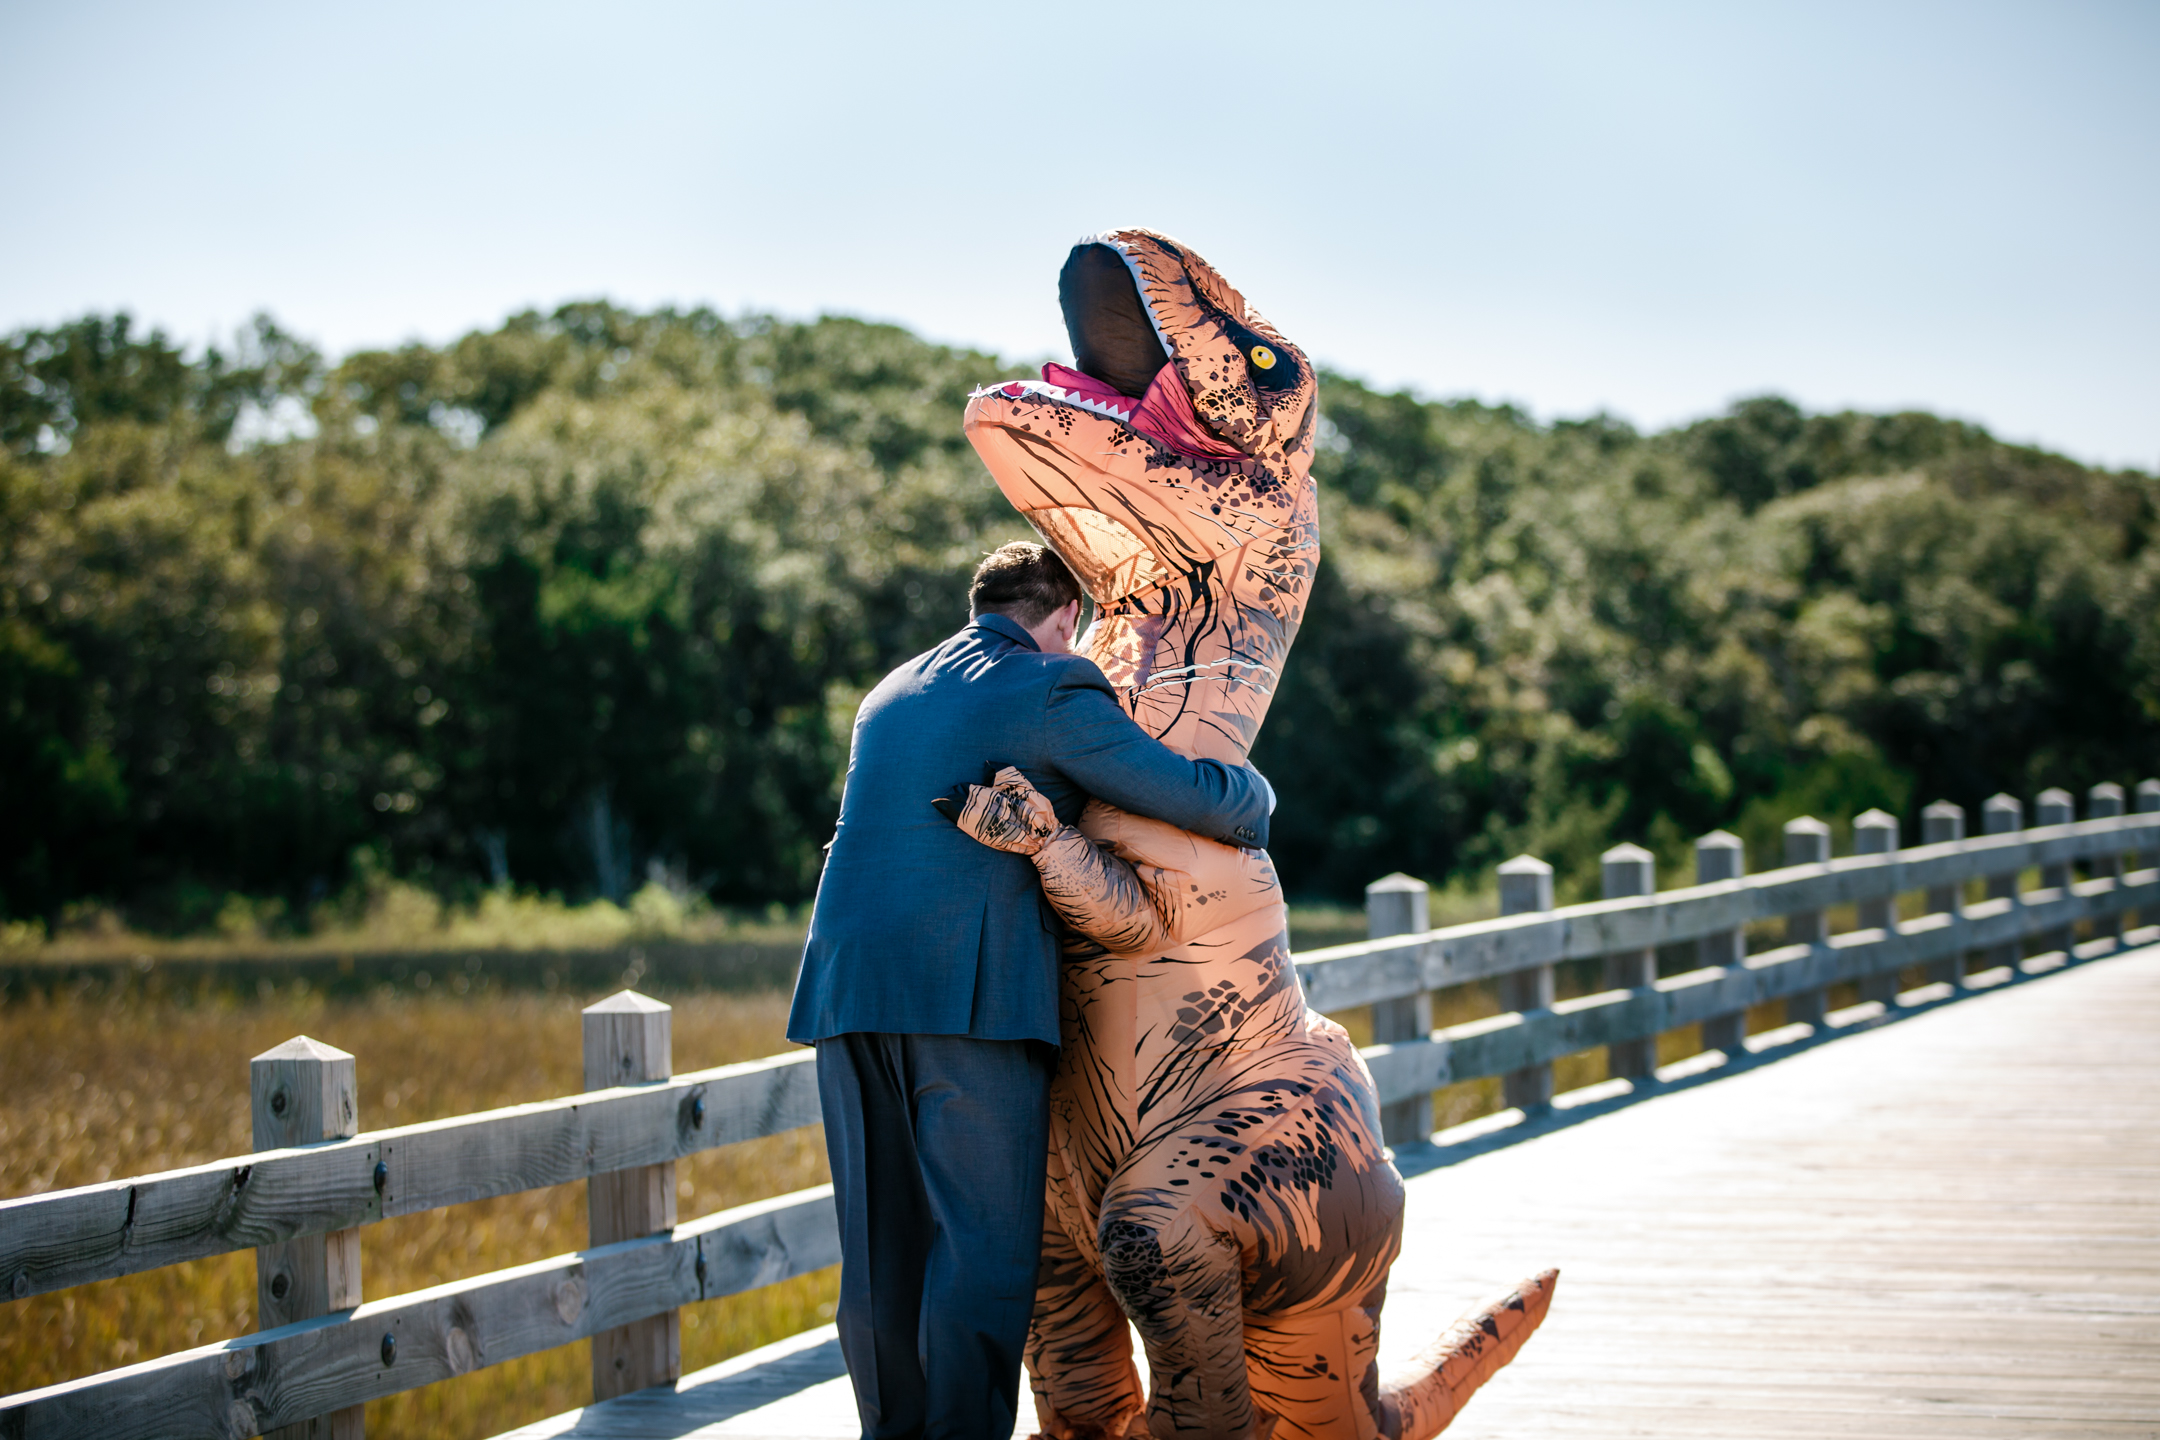 PHOTO: Bride surprises groom in T-Rex costume at the first look before their Nov. 5, 2016 wedding.